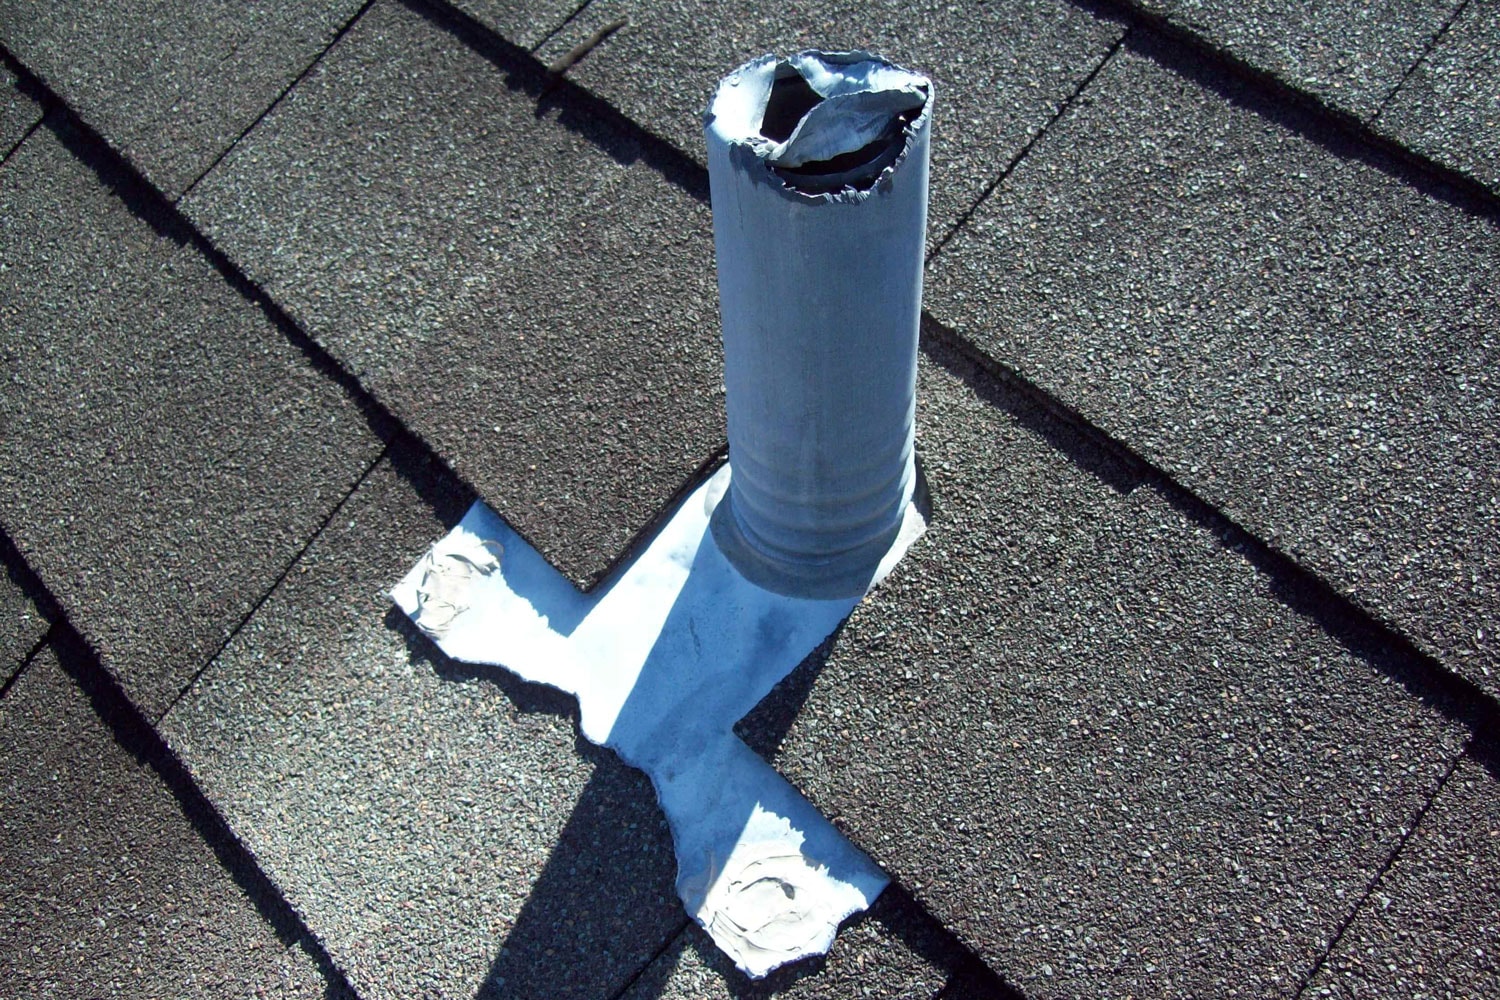 White plumbing colored vent in a roof with asphalt shingle roofing